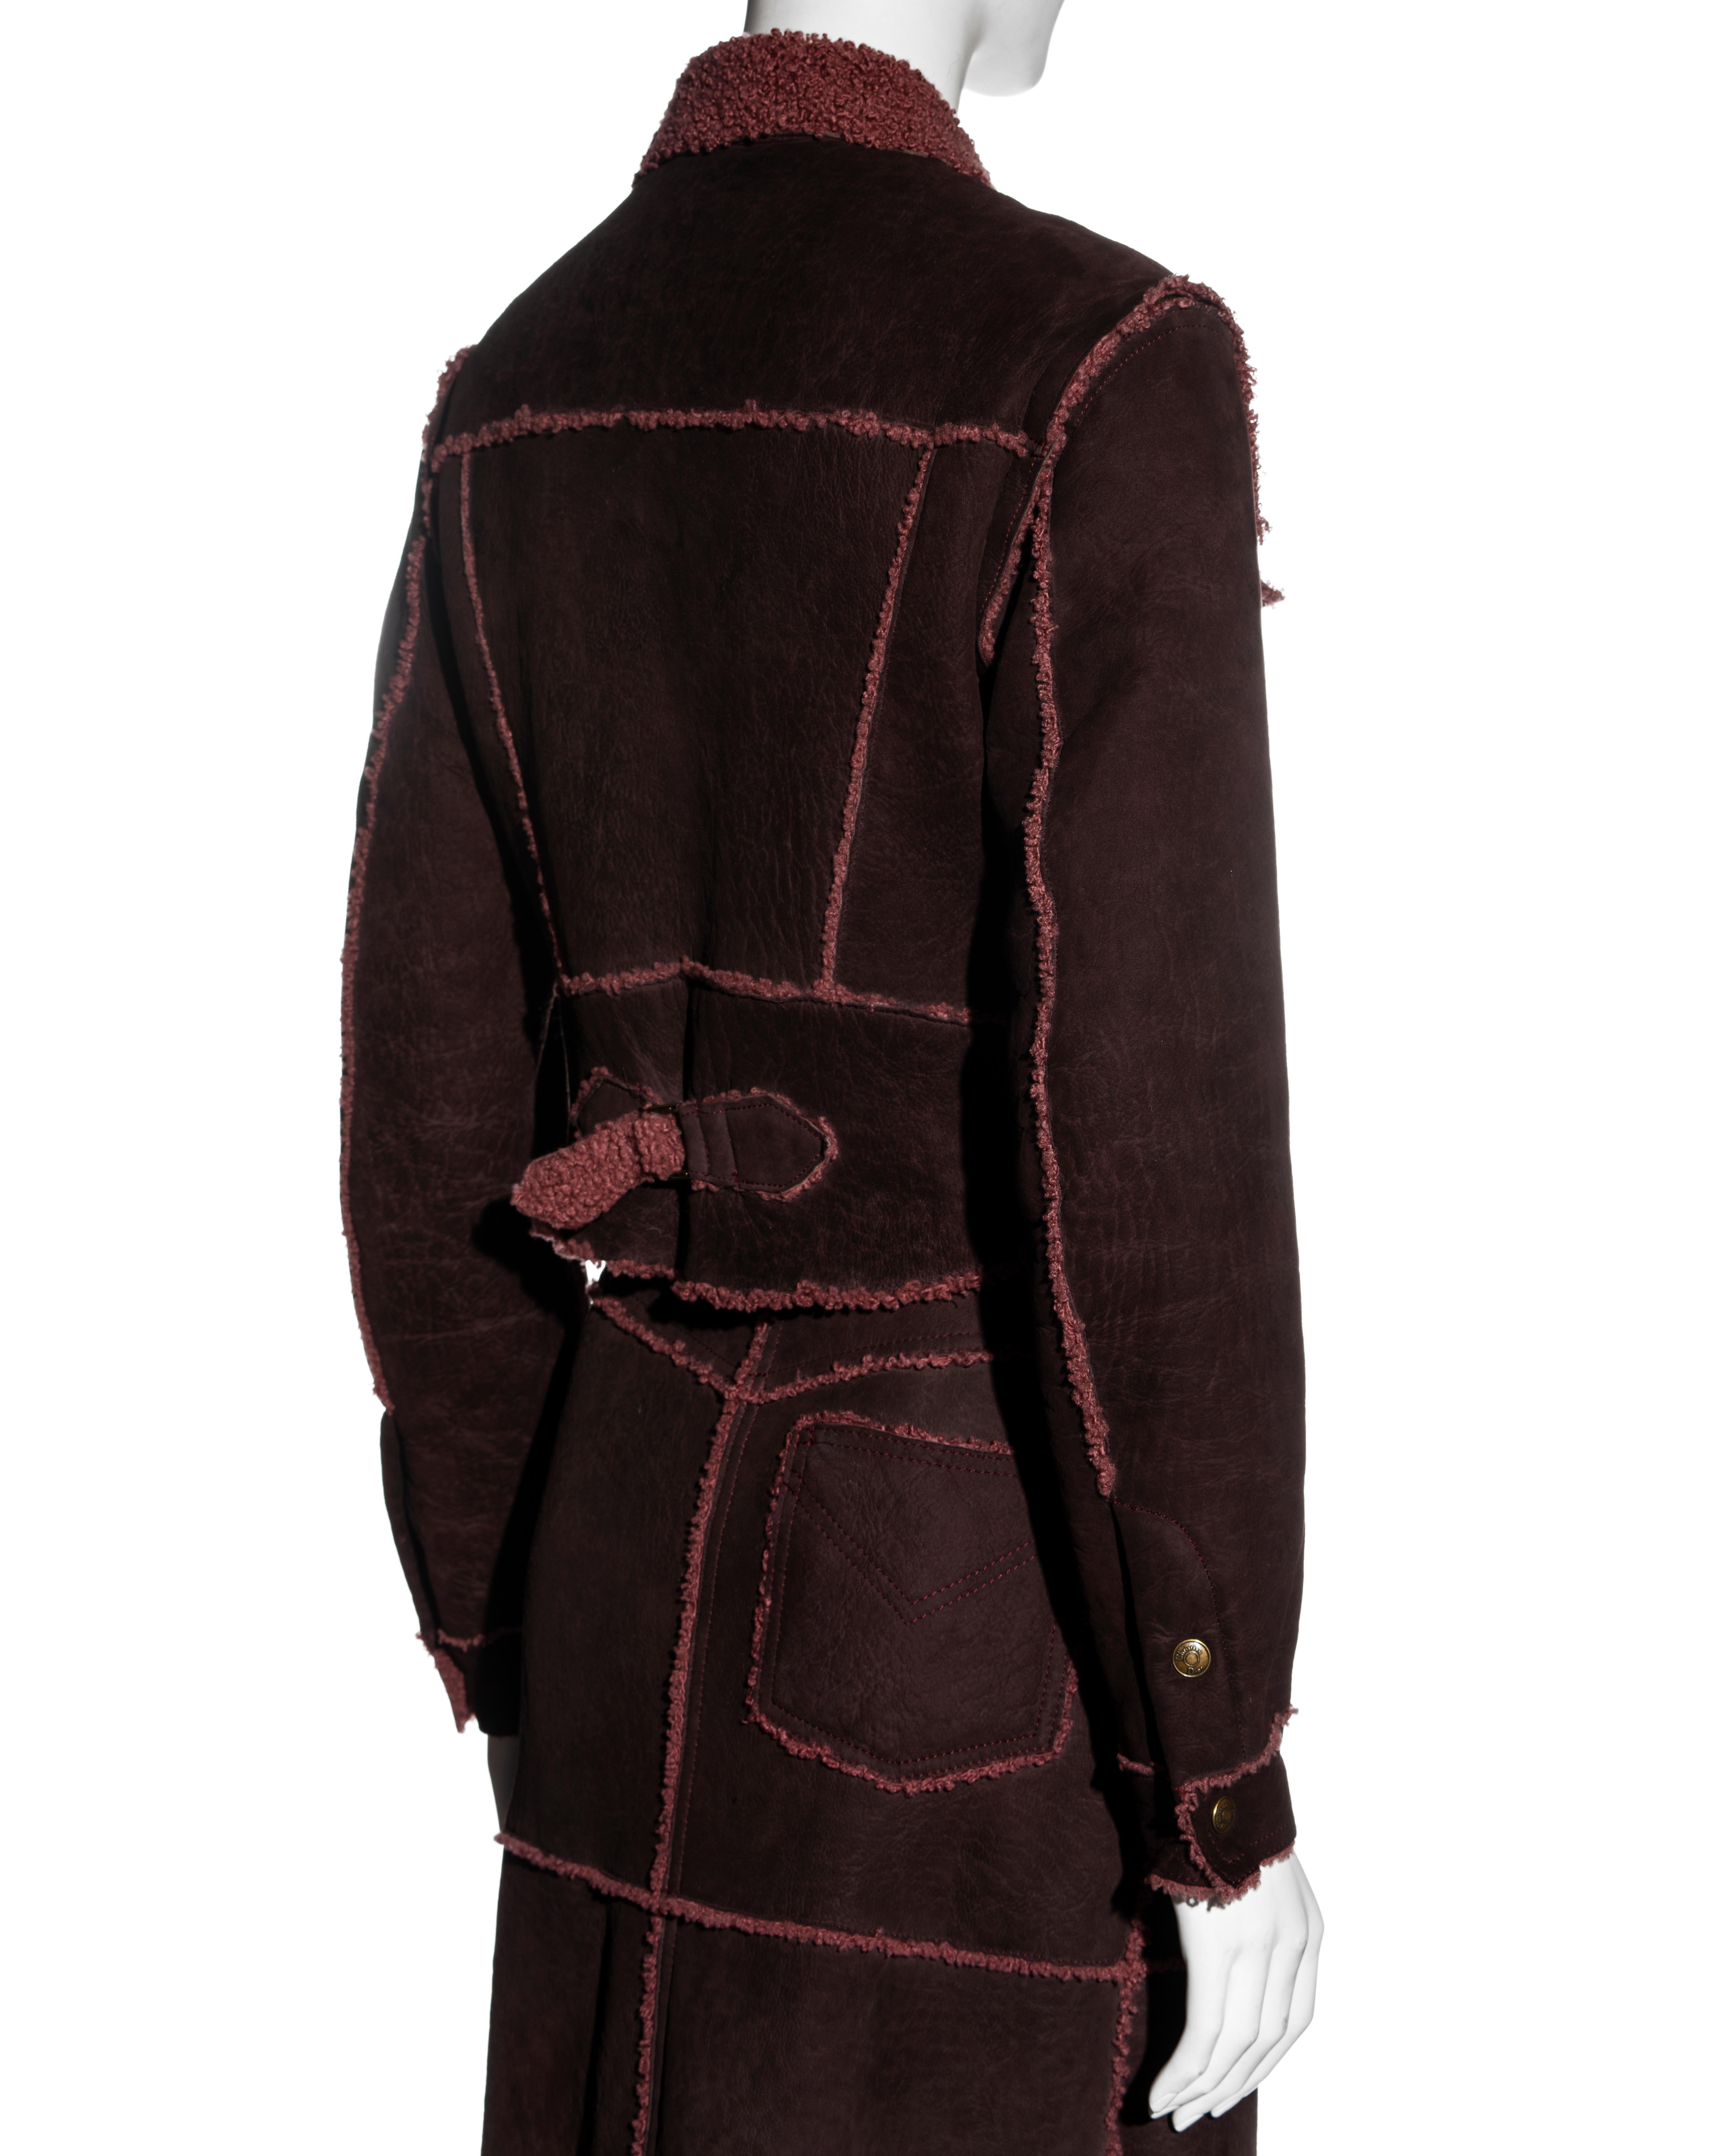 Women's Christian Dior by John Galliano shearling jacket and wrap skirt set , fw 2000